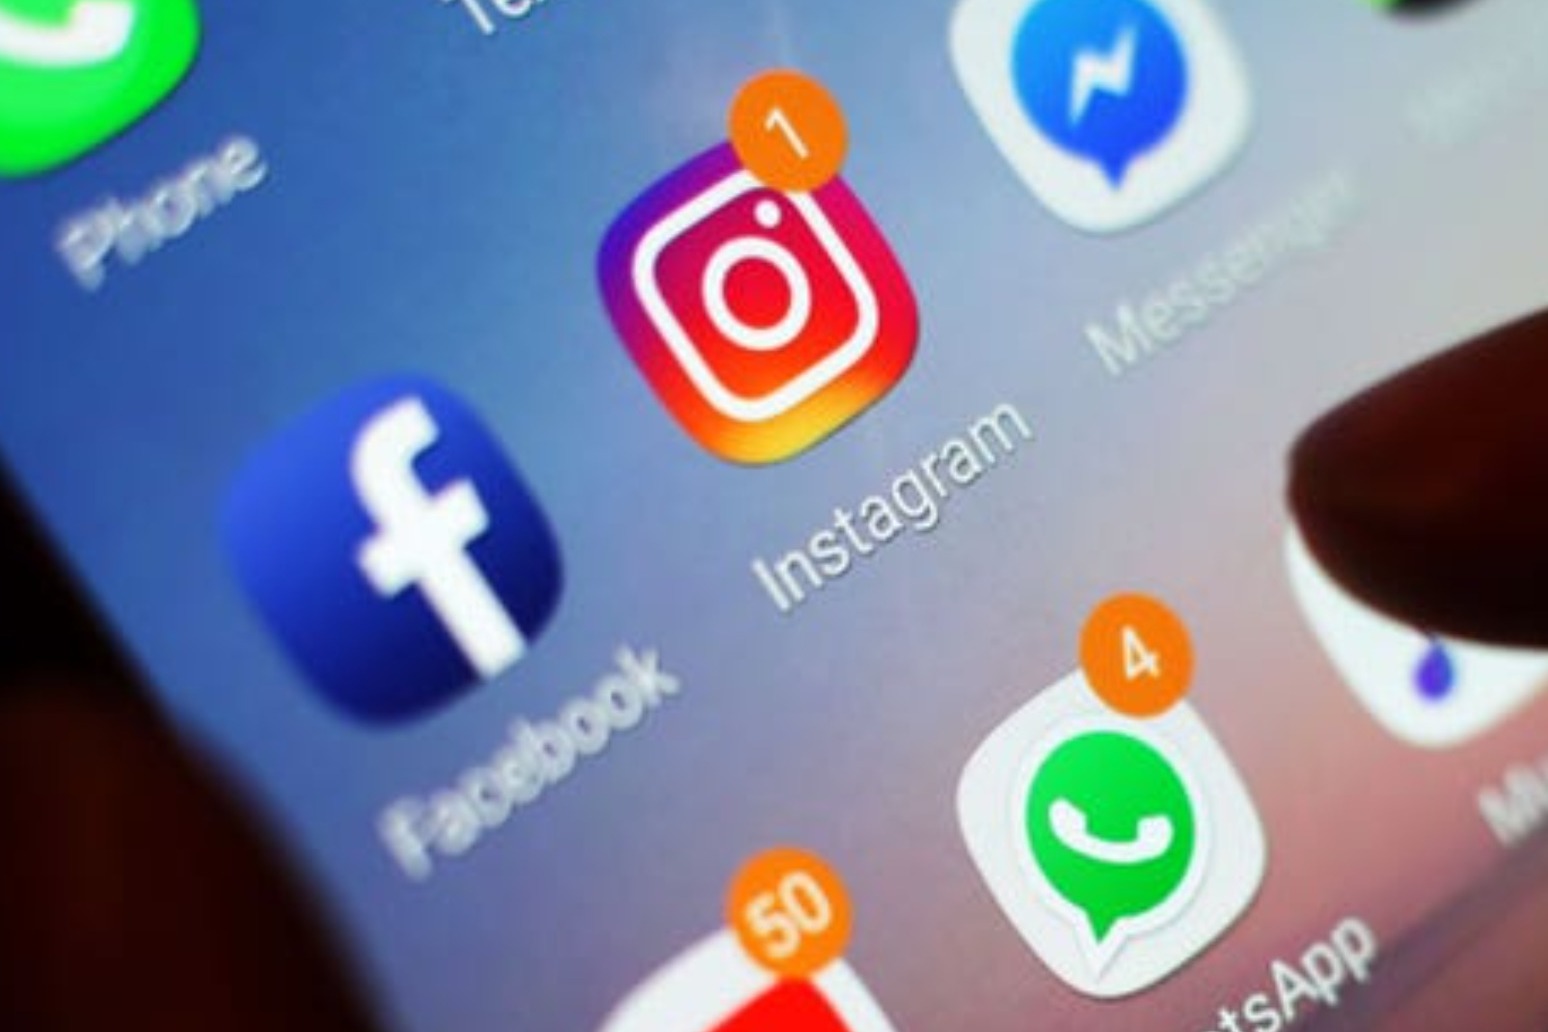 Instagram recommending misinformation to users, study says 